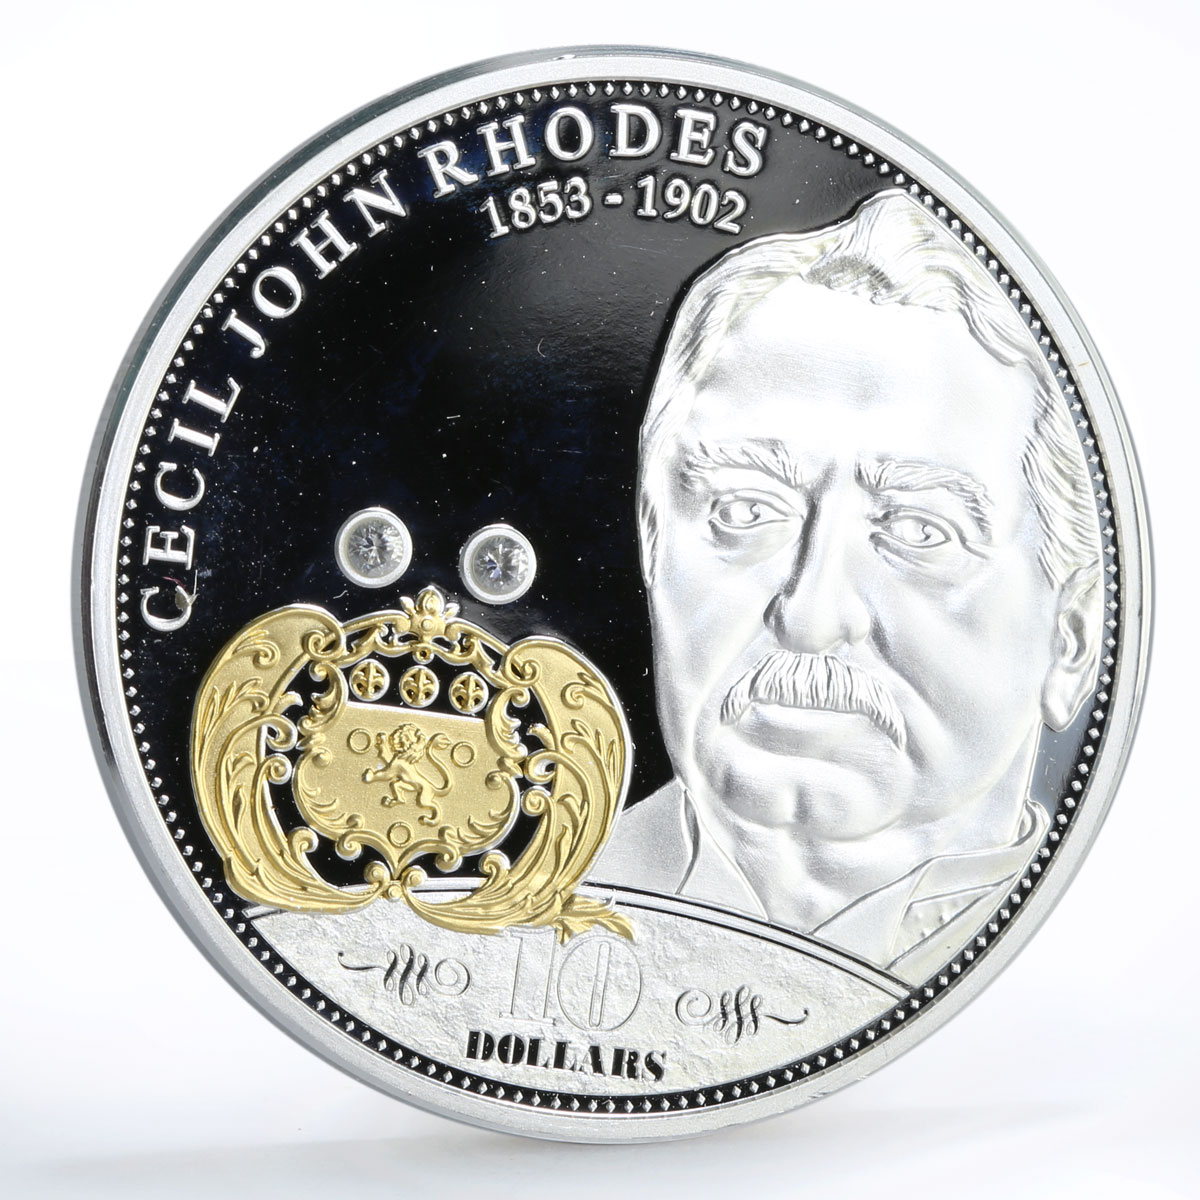 Cook Islands 10 dollars Financial Tycoons Cecil Rhodes gilded silver coin 2009